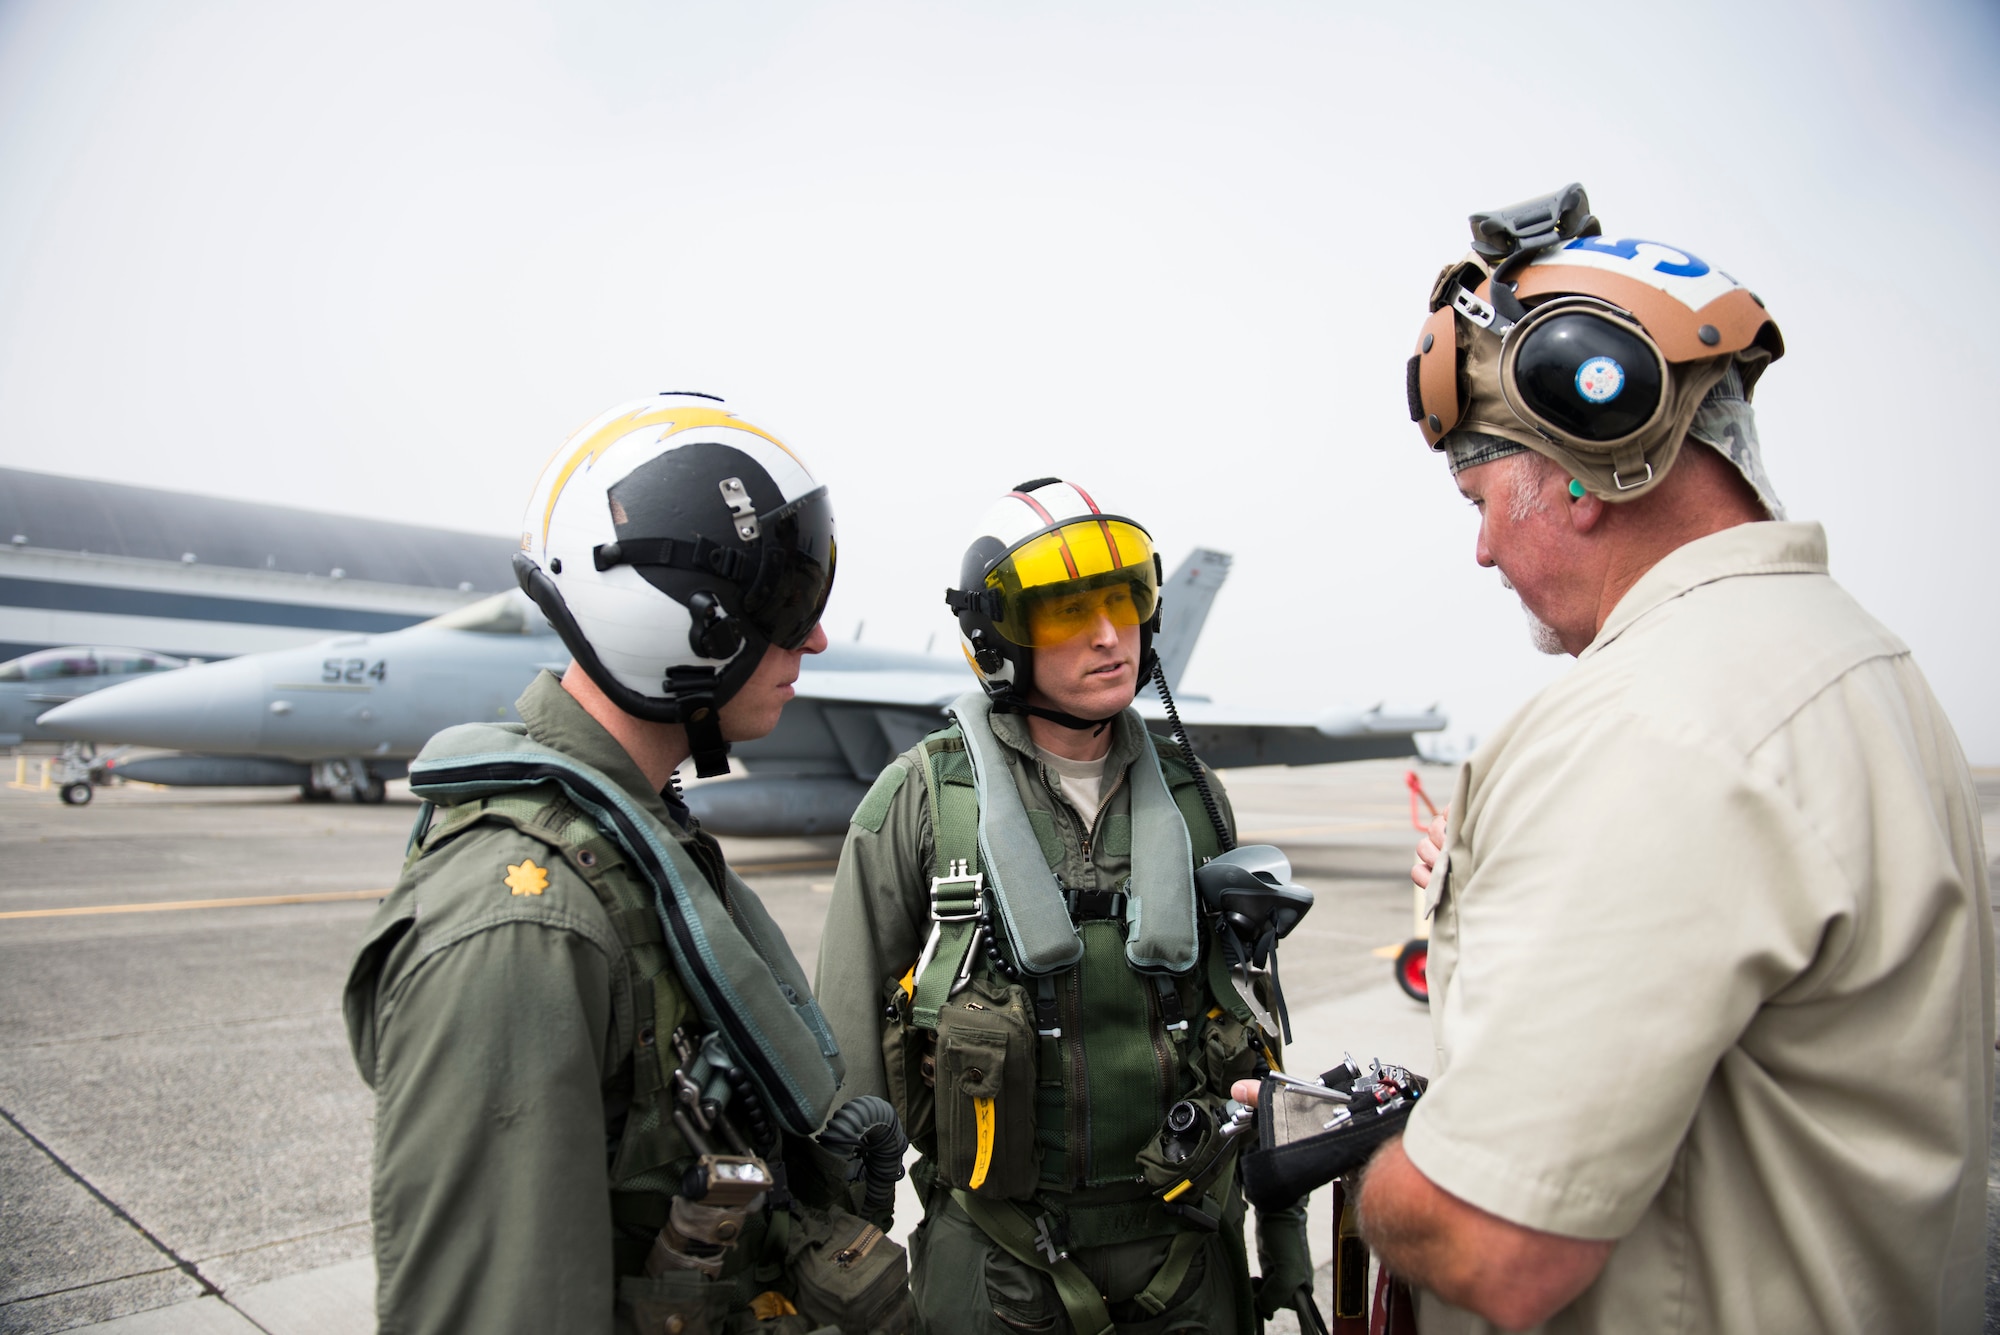 U.S. Air Force Lt. Col. Don Keen, 390th Electronic Combat Squadron commander, and Lt. Cmdr. Kerry Hicks, VAQ-129 EA-18G Growler pilot, receives a briefing before a flight in the EA-18G Growler at Naval Air Station Whidbey Island, Wash., August 7, 2014. Electronic attack missions are extremely complex and vital to providing cover for friendly aircraft during joint-combat operations. (U.S. Air Force photo by Airman 1st Class Malissa Lott/RELEASED)